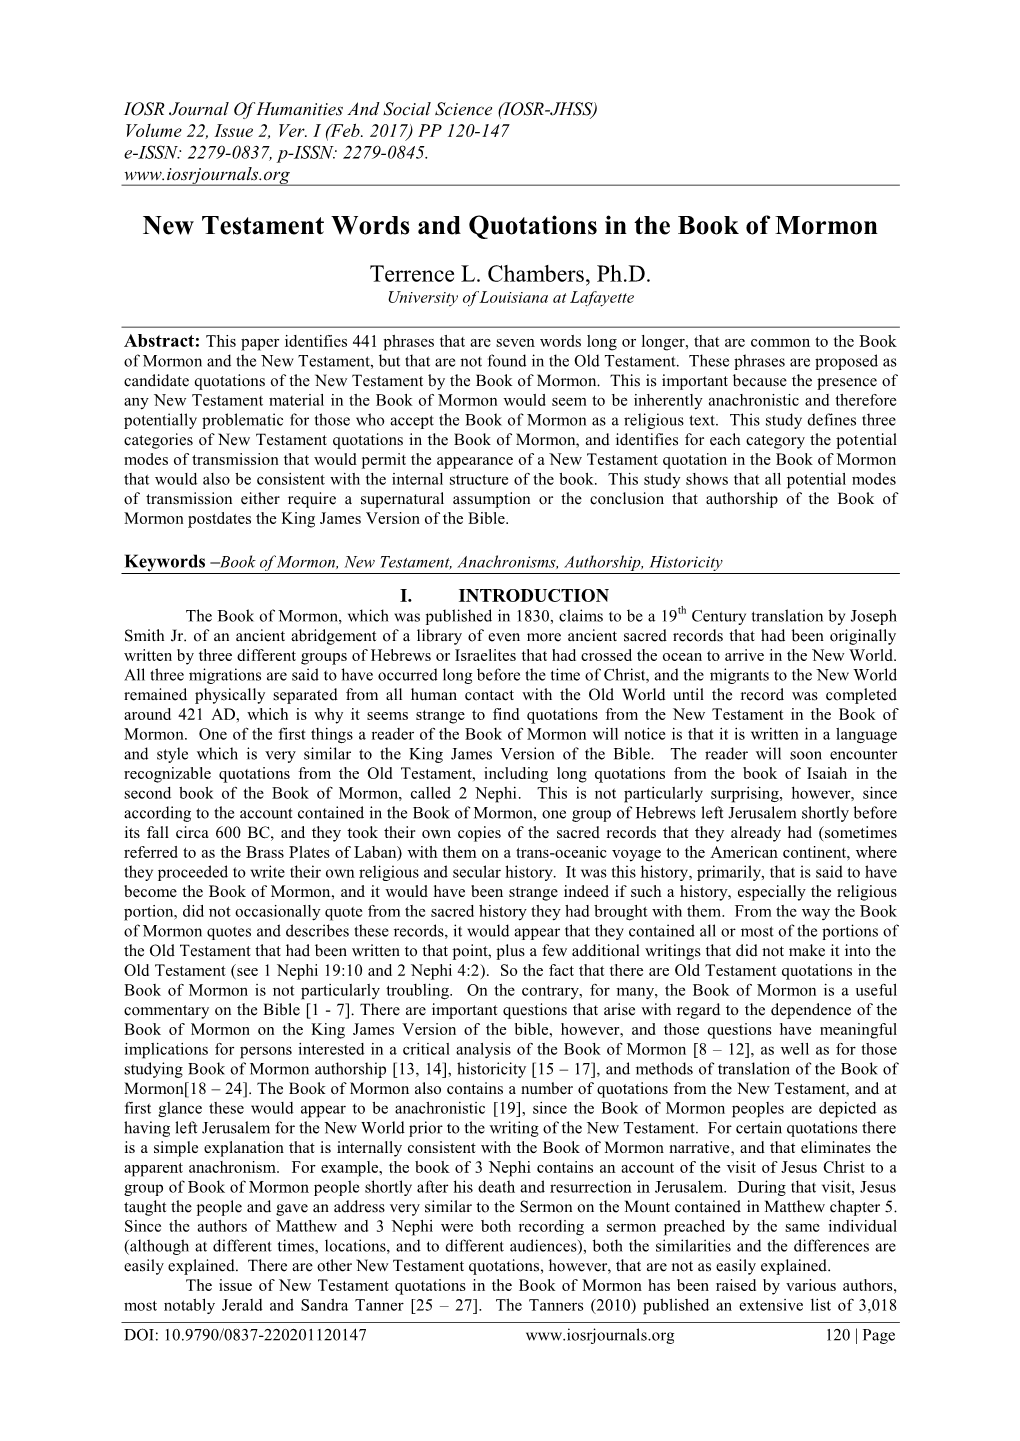 New Testament Words and Quotations in the Book of Mormon